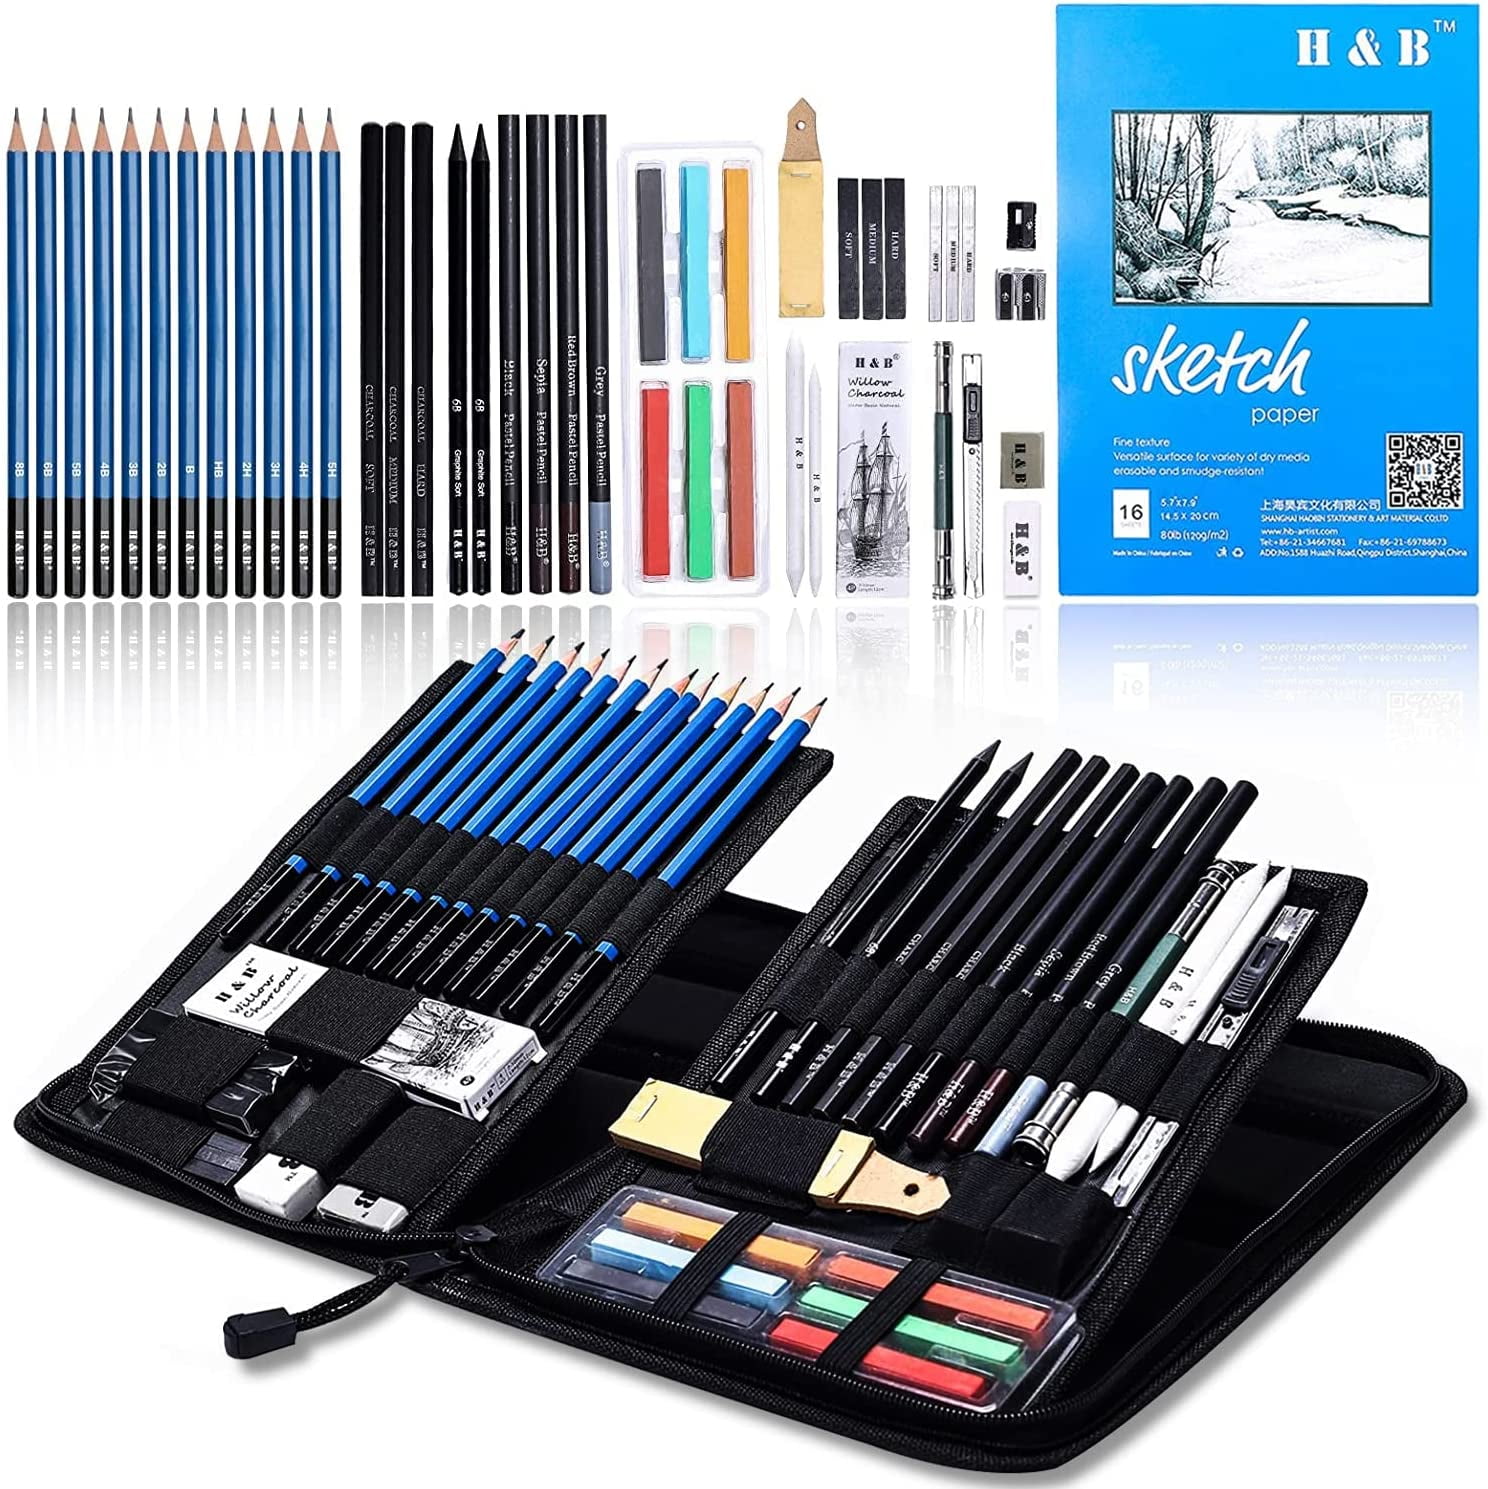 72 Pcs Art Supplies Art Set,Drawing Supply for Artist Adult Teen Kids,Drawing  Pencils Kit,Sketching Set Include Charcoal & Colored  Pencil,Sketchbook,Coloring Book in Travel Case 